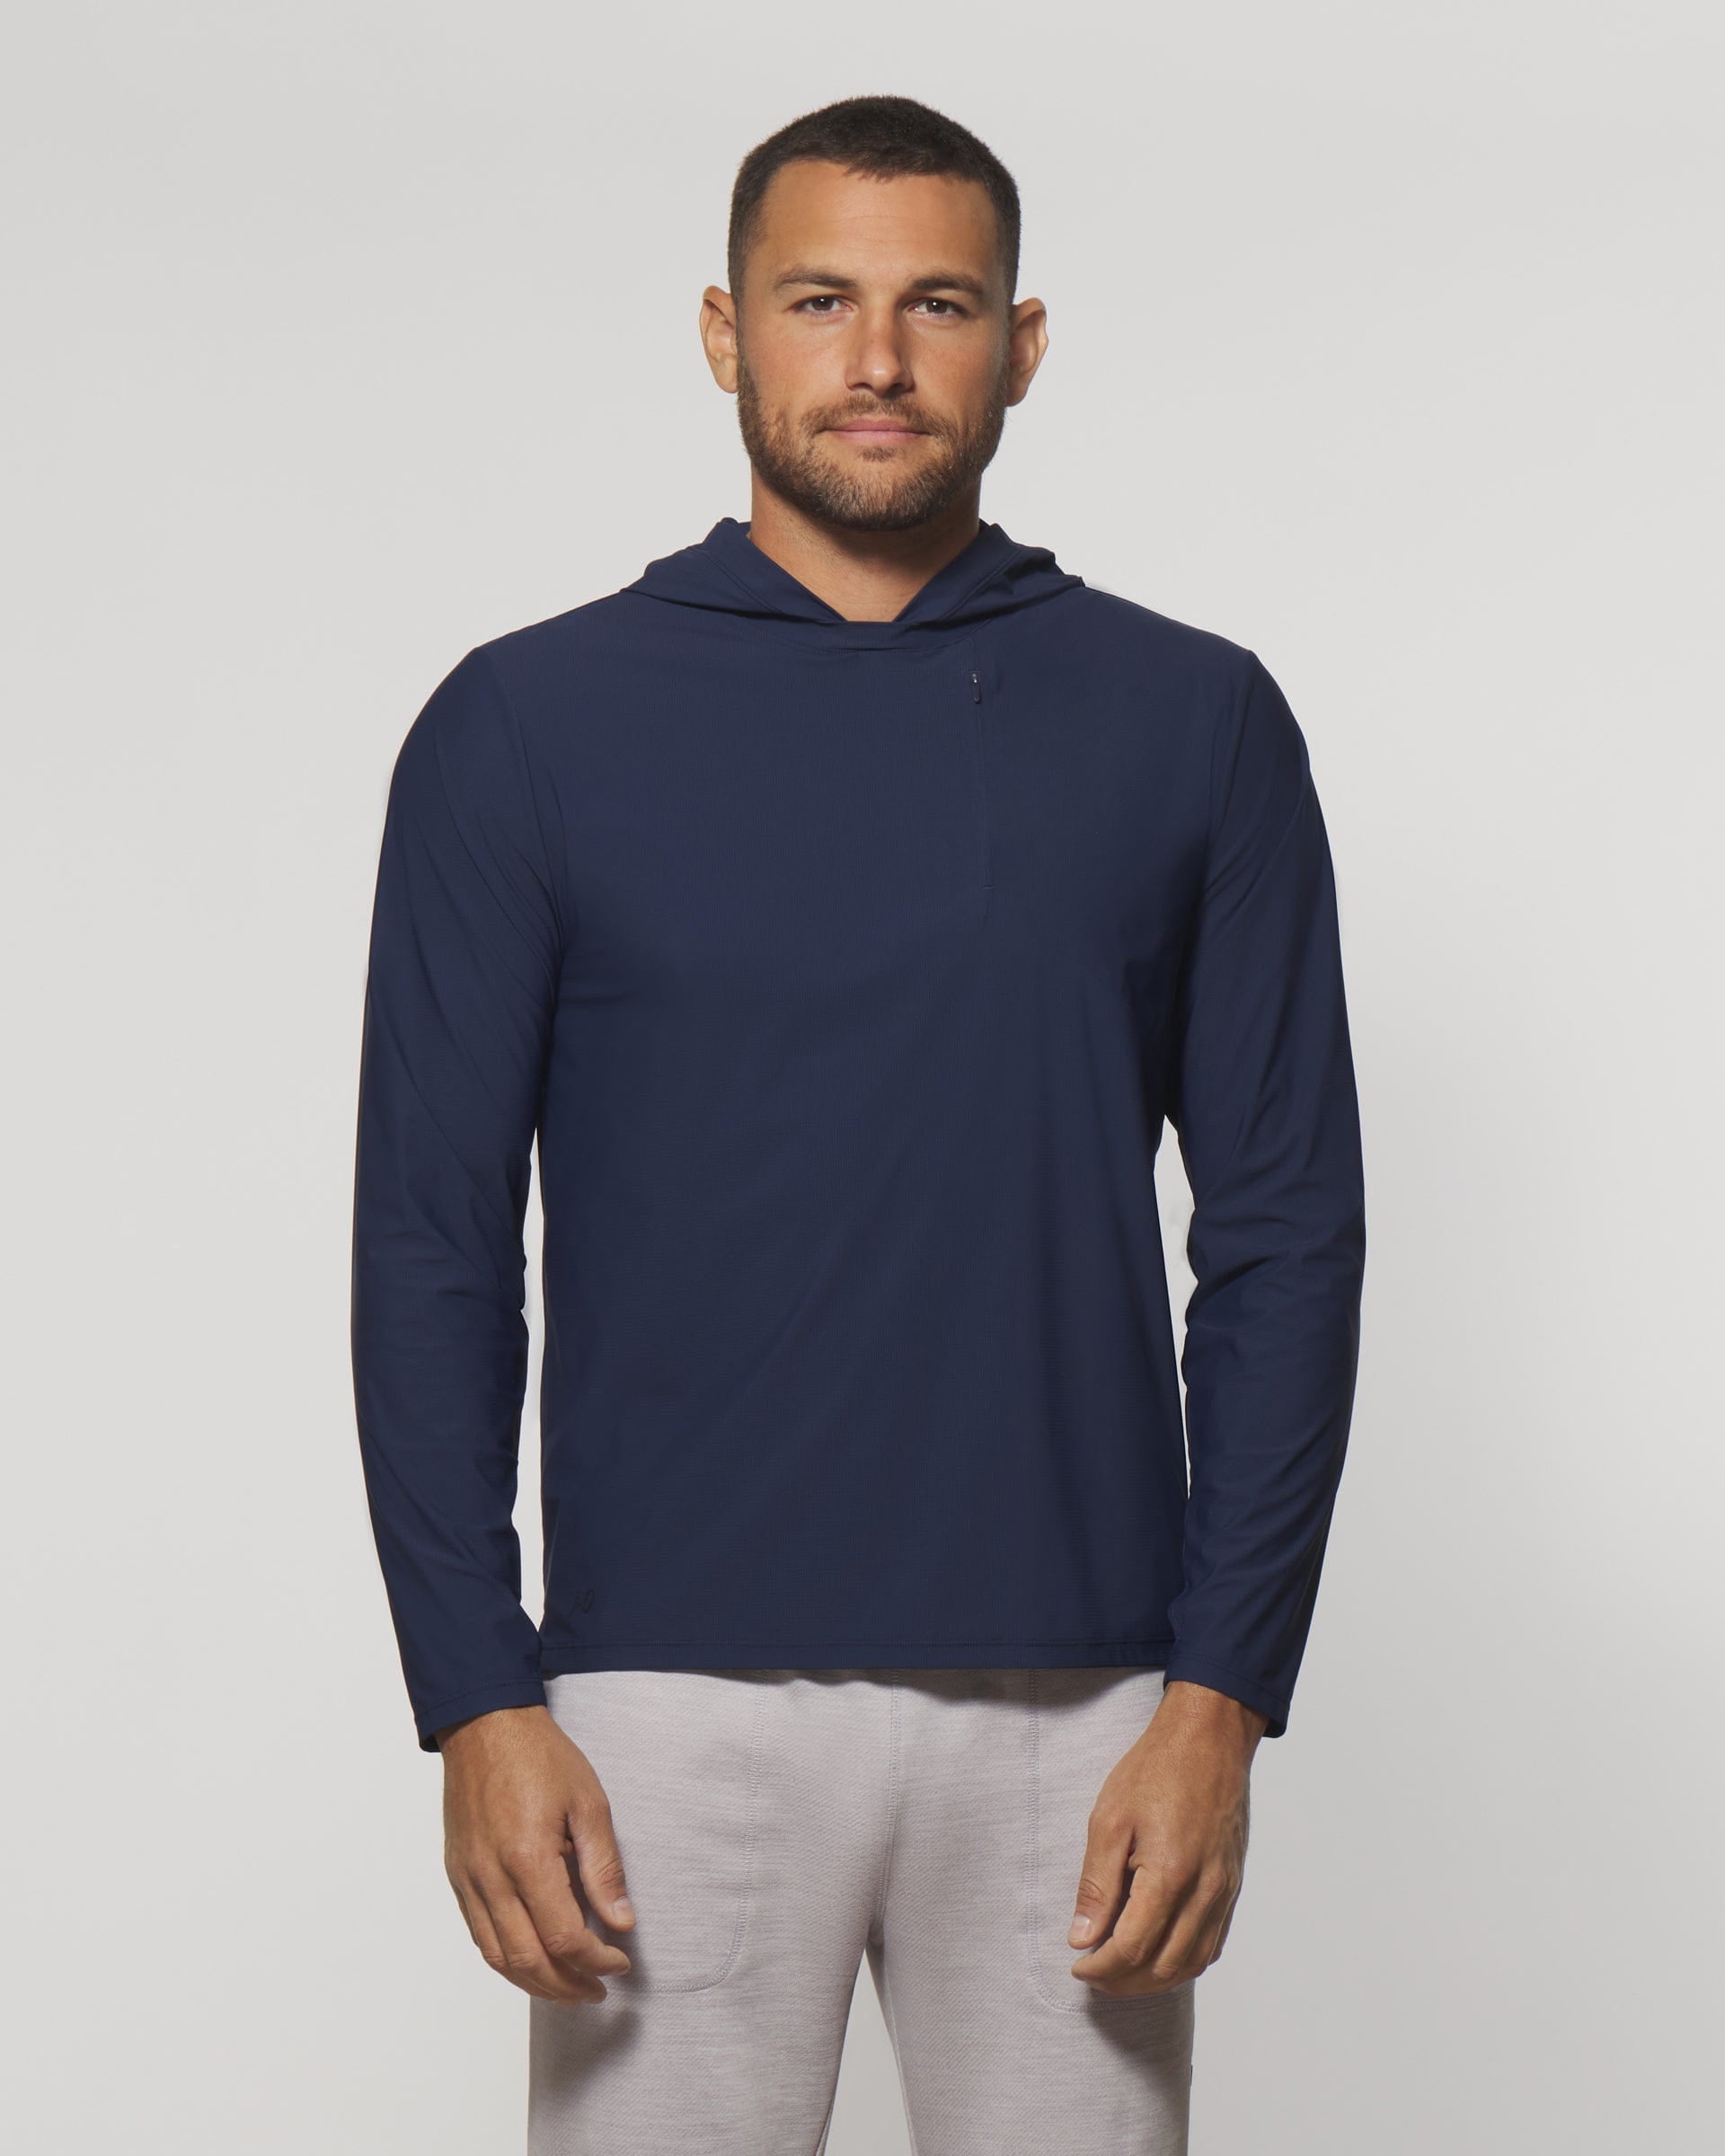 Men's Performance Polos, Pullovers, Shorts & Apparel · johnnie-O